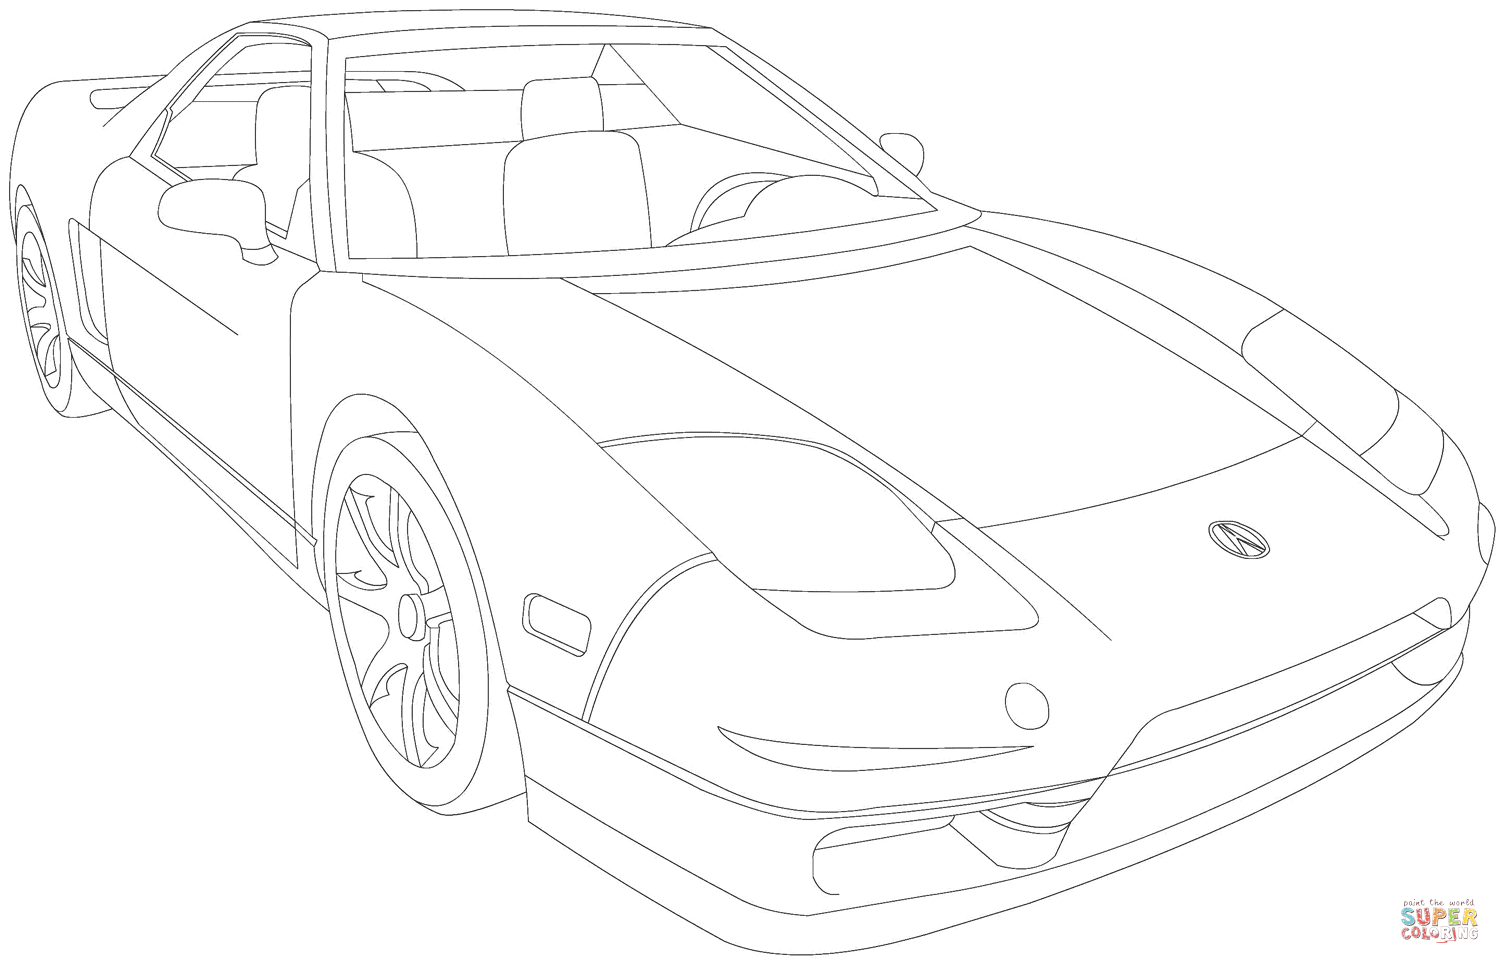 Acura NSX coloring page | Free Printable Coloring Pages